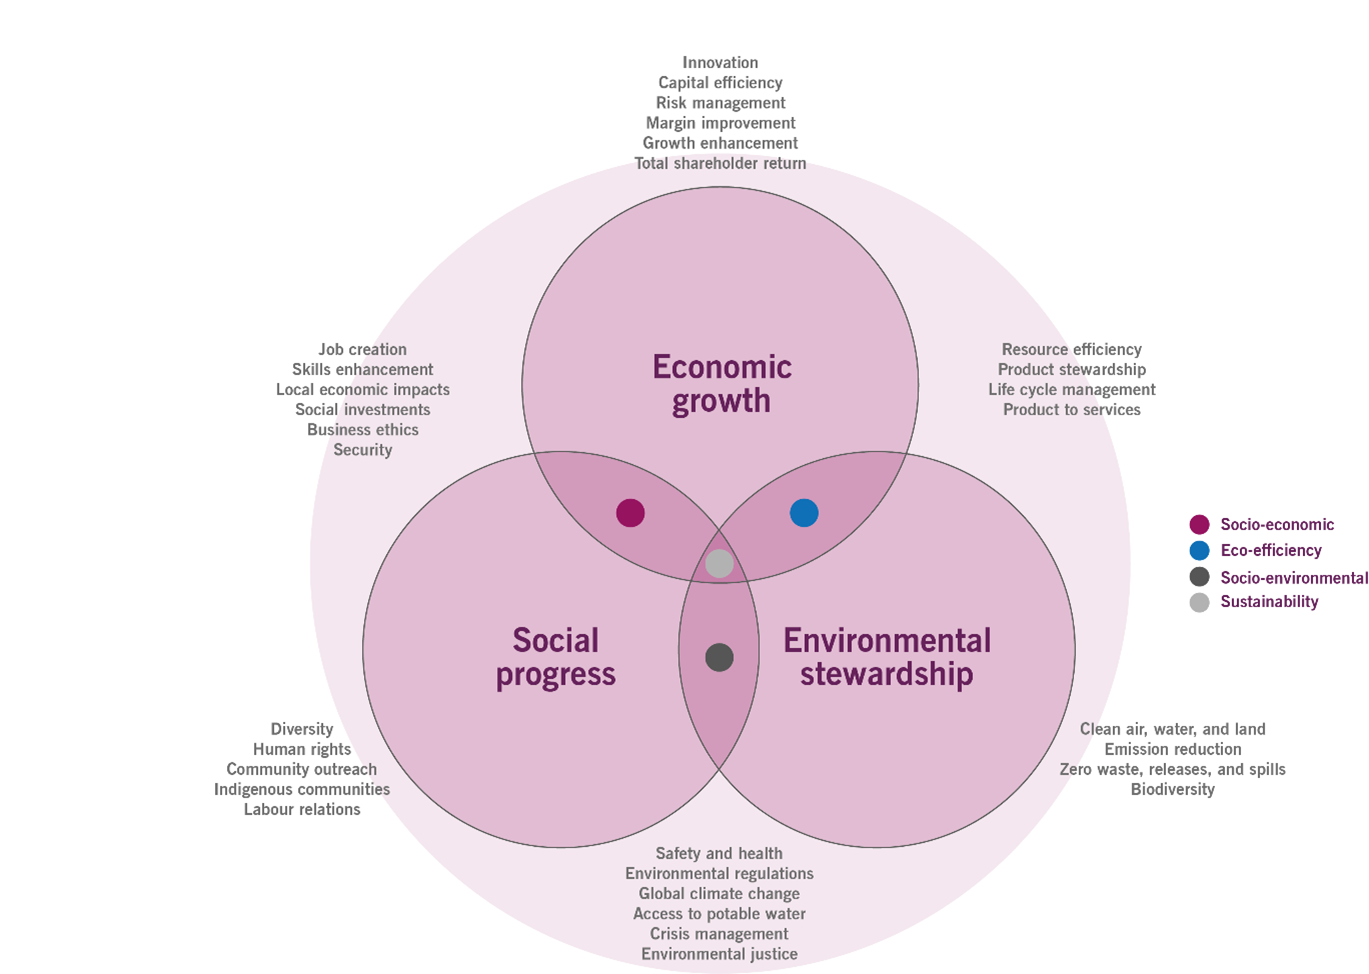 Image of Figure 2.1 shows Sustainability and the triple bottom line approach